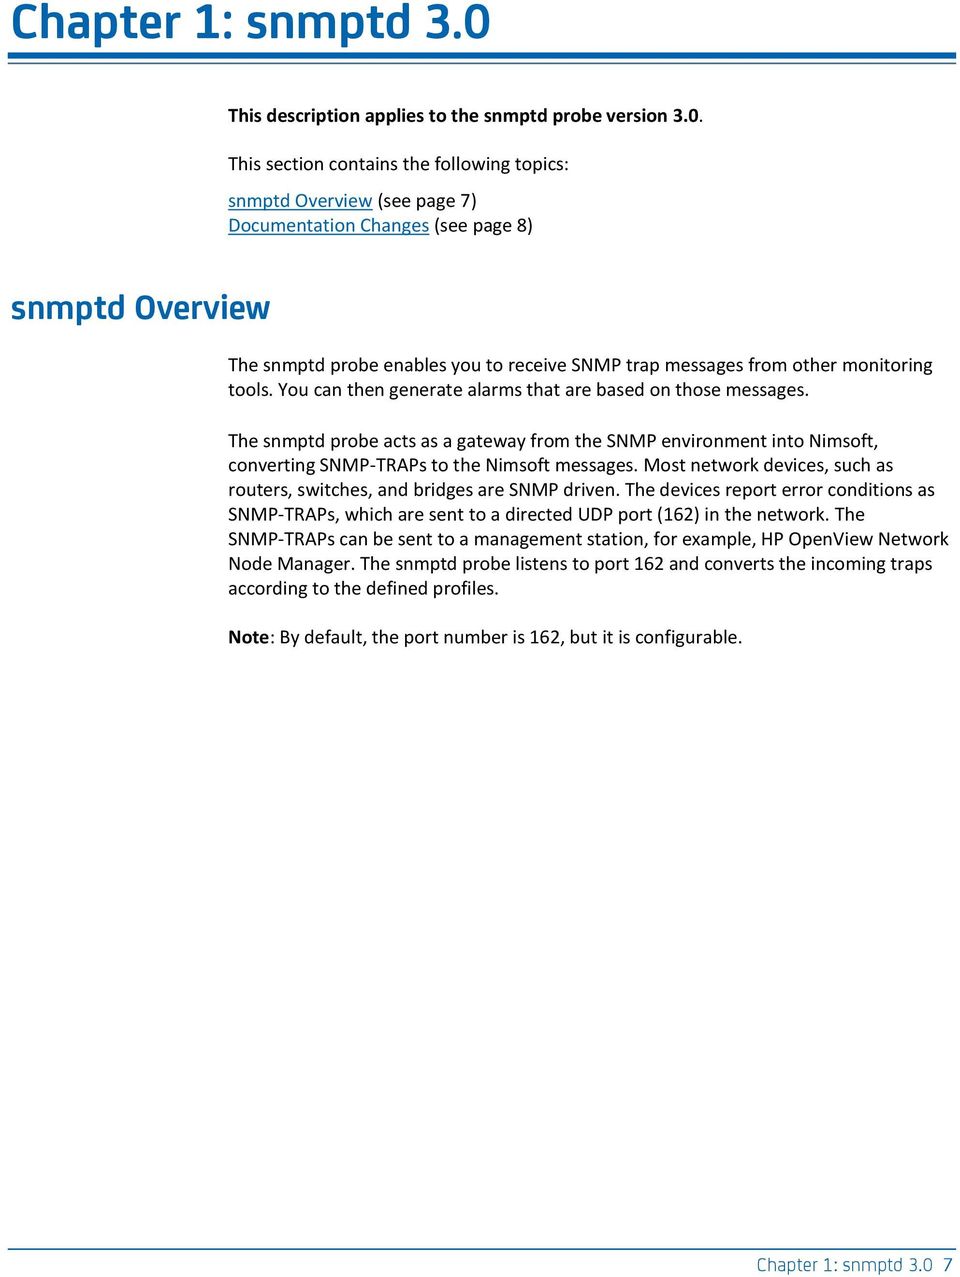 This section contains the following topics: snmptd Overview (see page 7) Documentation Changes (see page 8) snmptd Overview The snmptd probe enables you to receive SNMP trap messages from other